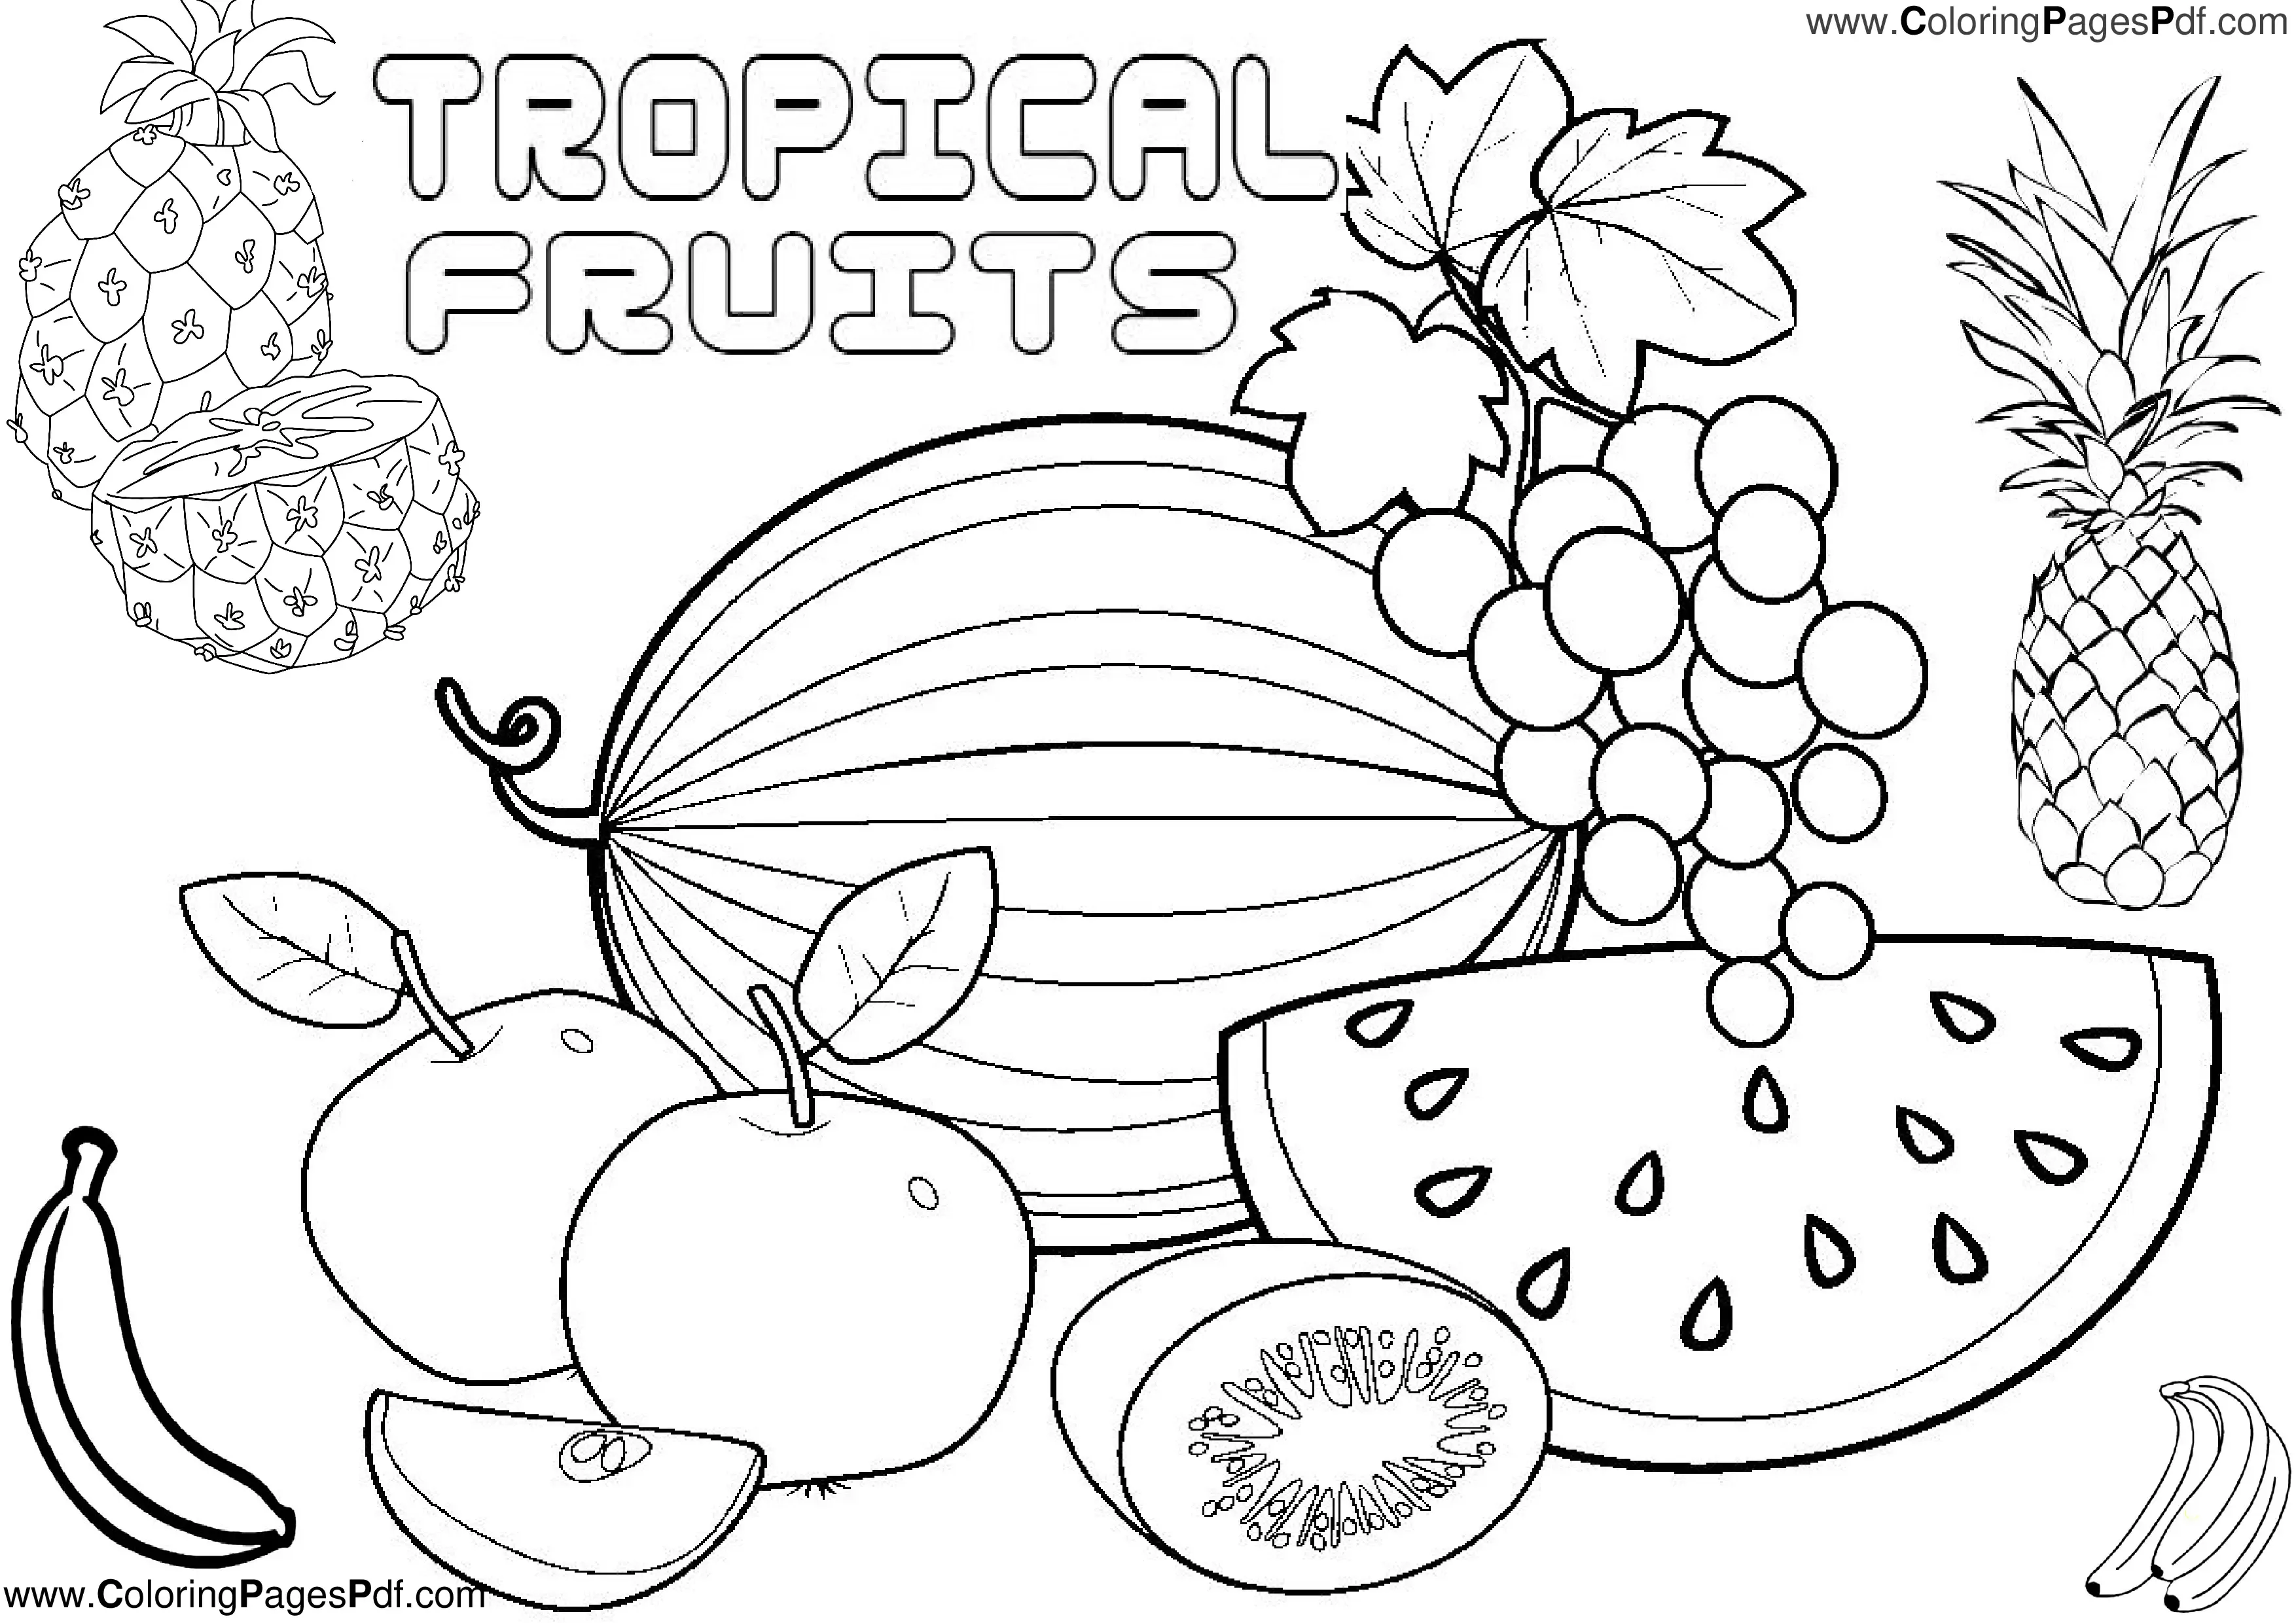 Tropical fruit coloring pages